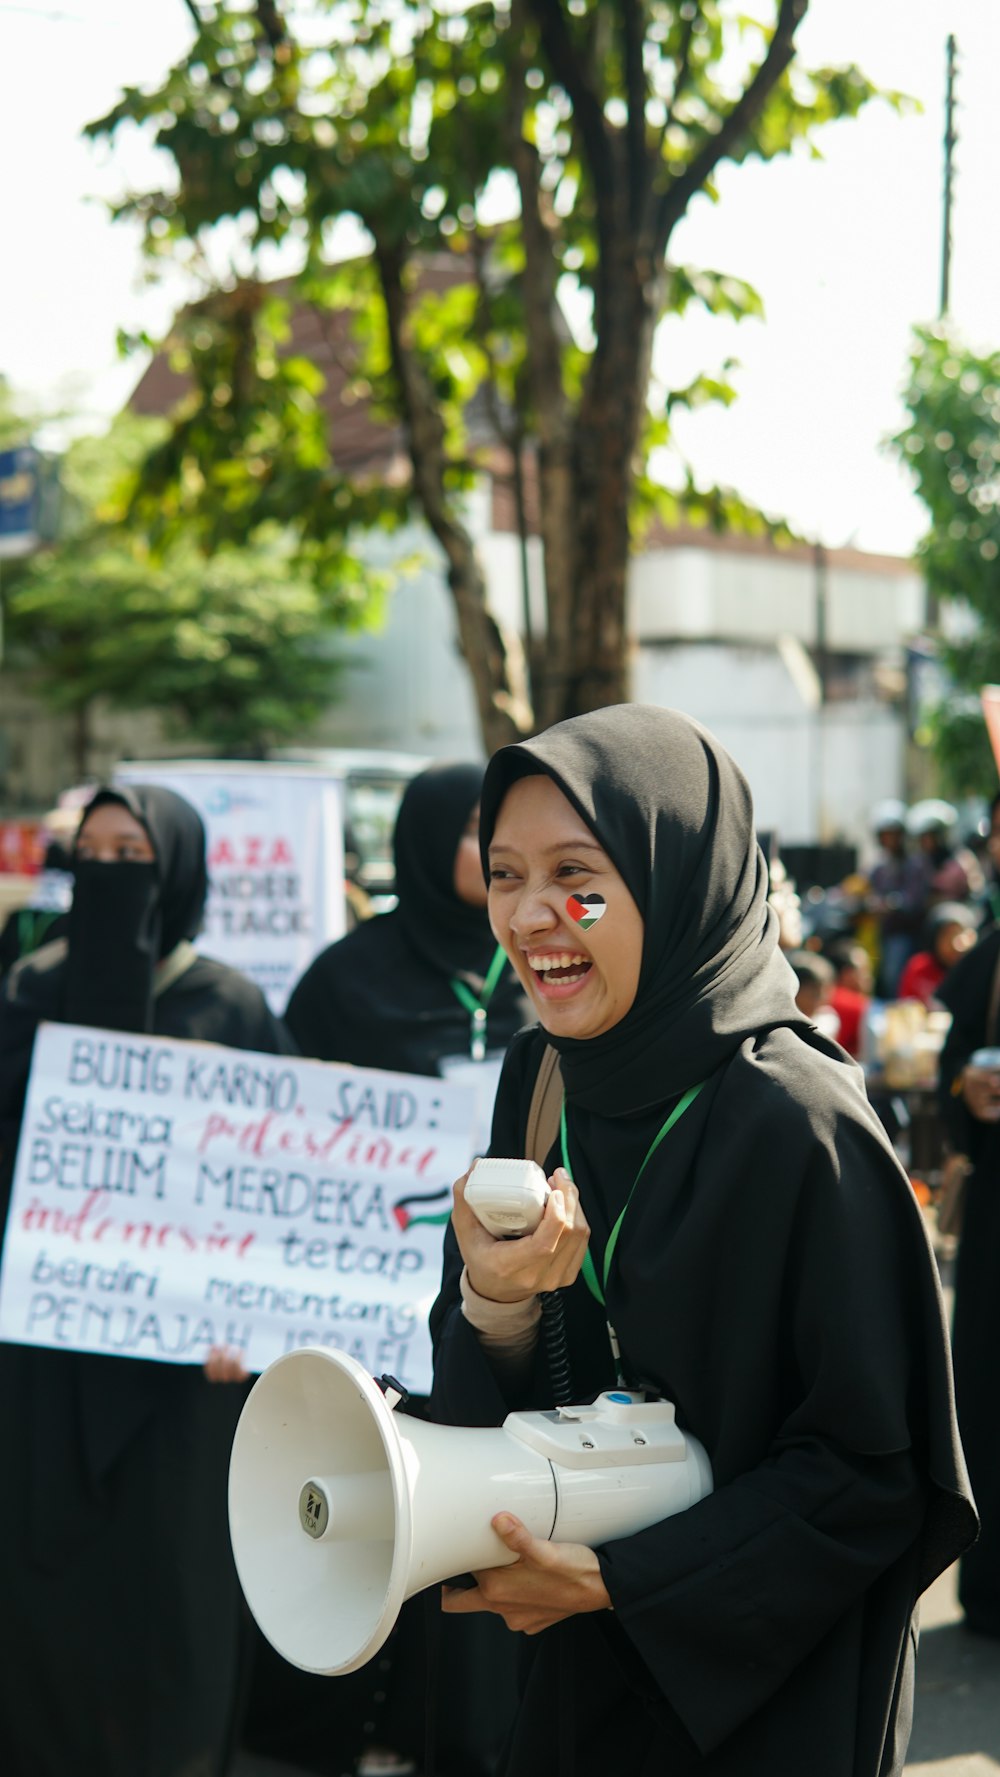 a woman holding a megaphone and a sign